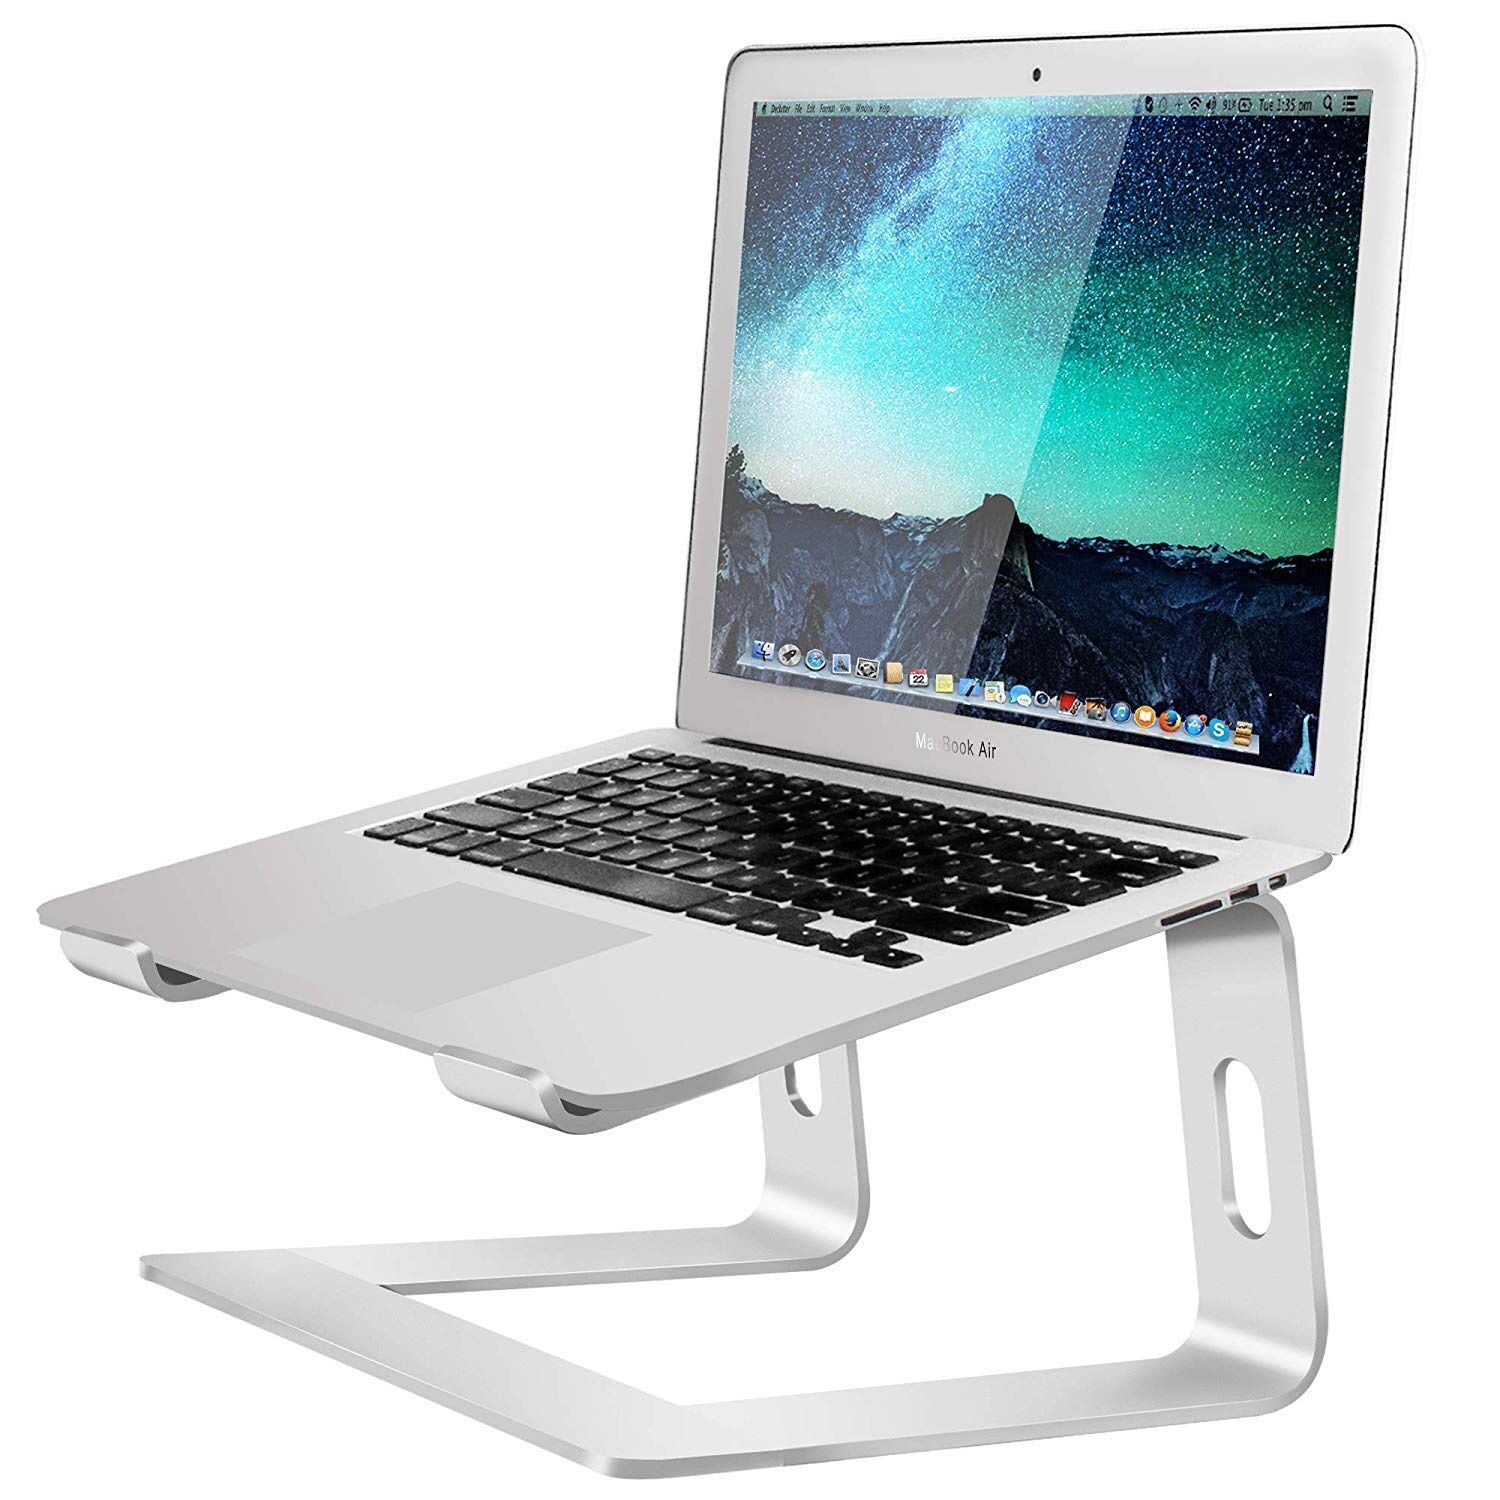 Laptop Stand for Desk Compatible with Mac MacBook Pro Air Notebook, Portable Holder Ergonomic Elevator Metal Riser